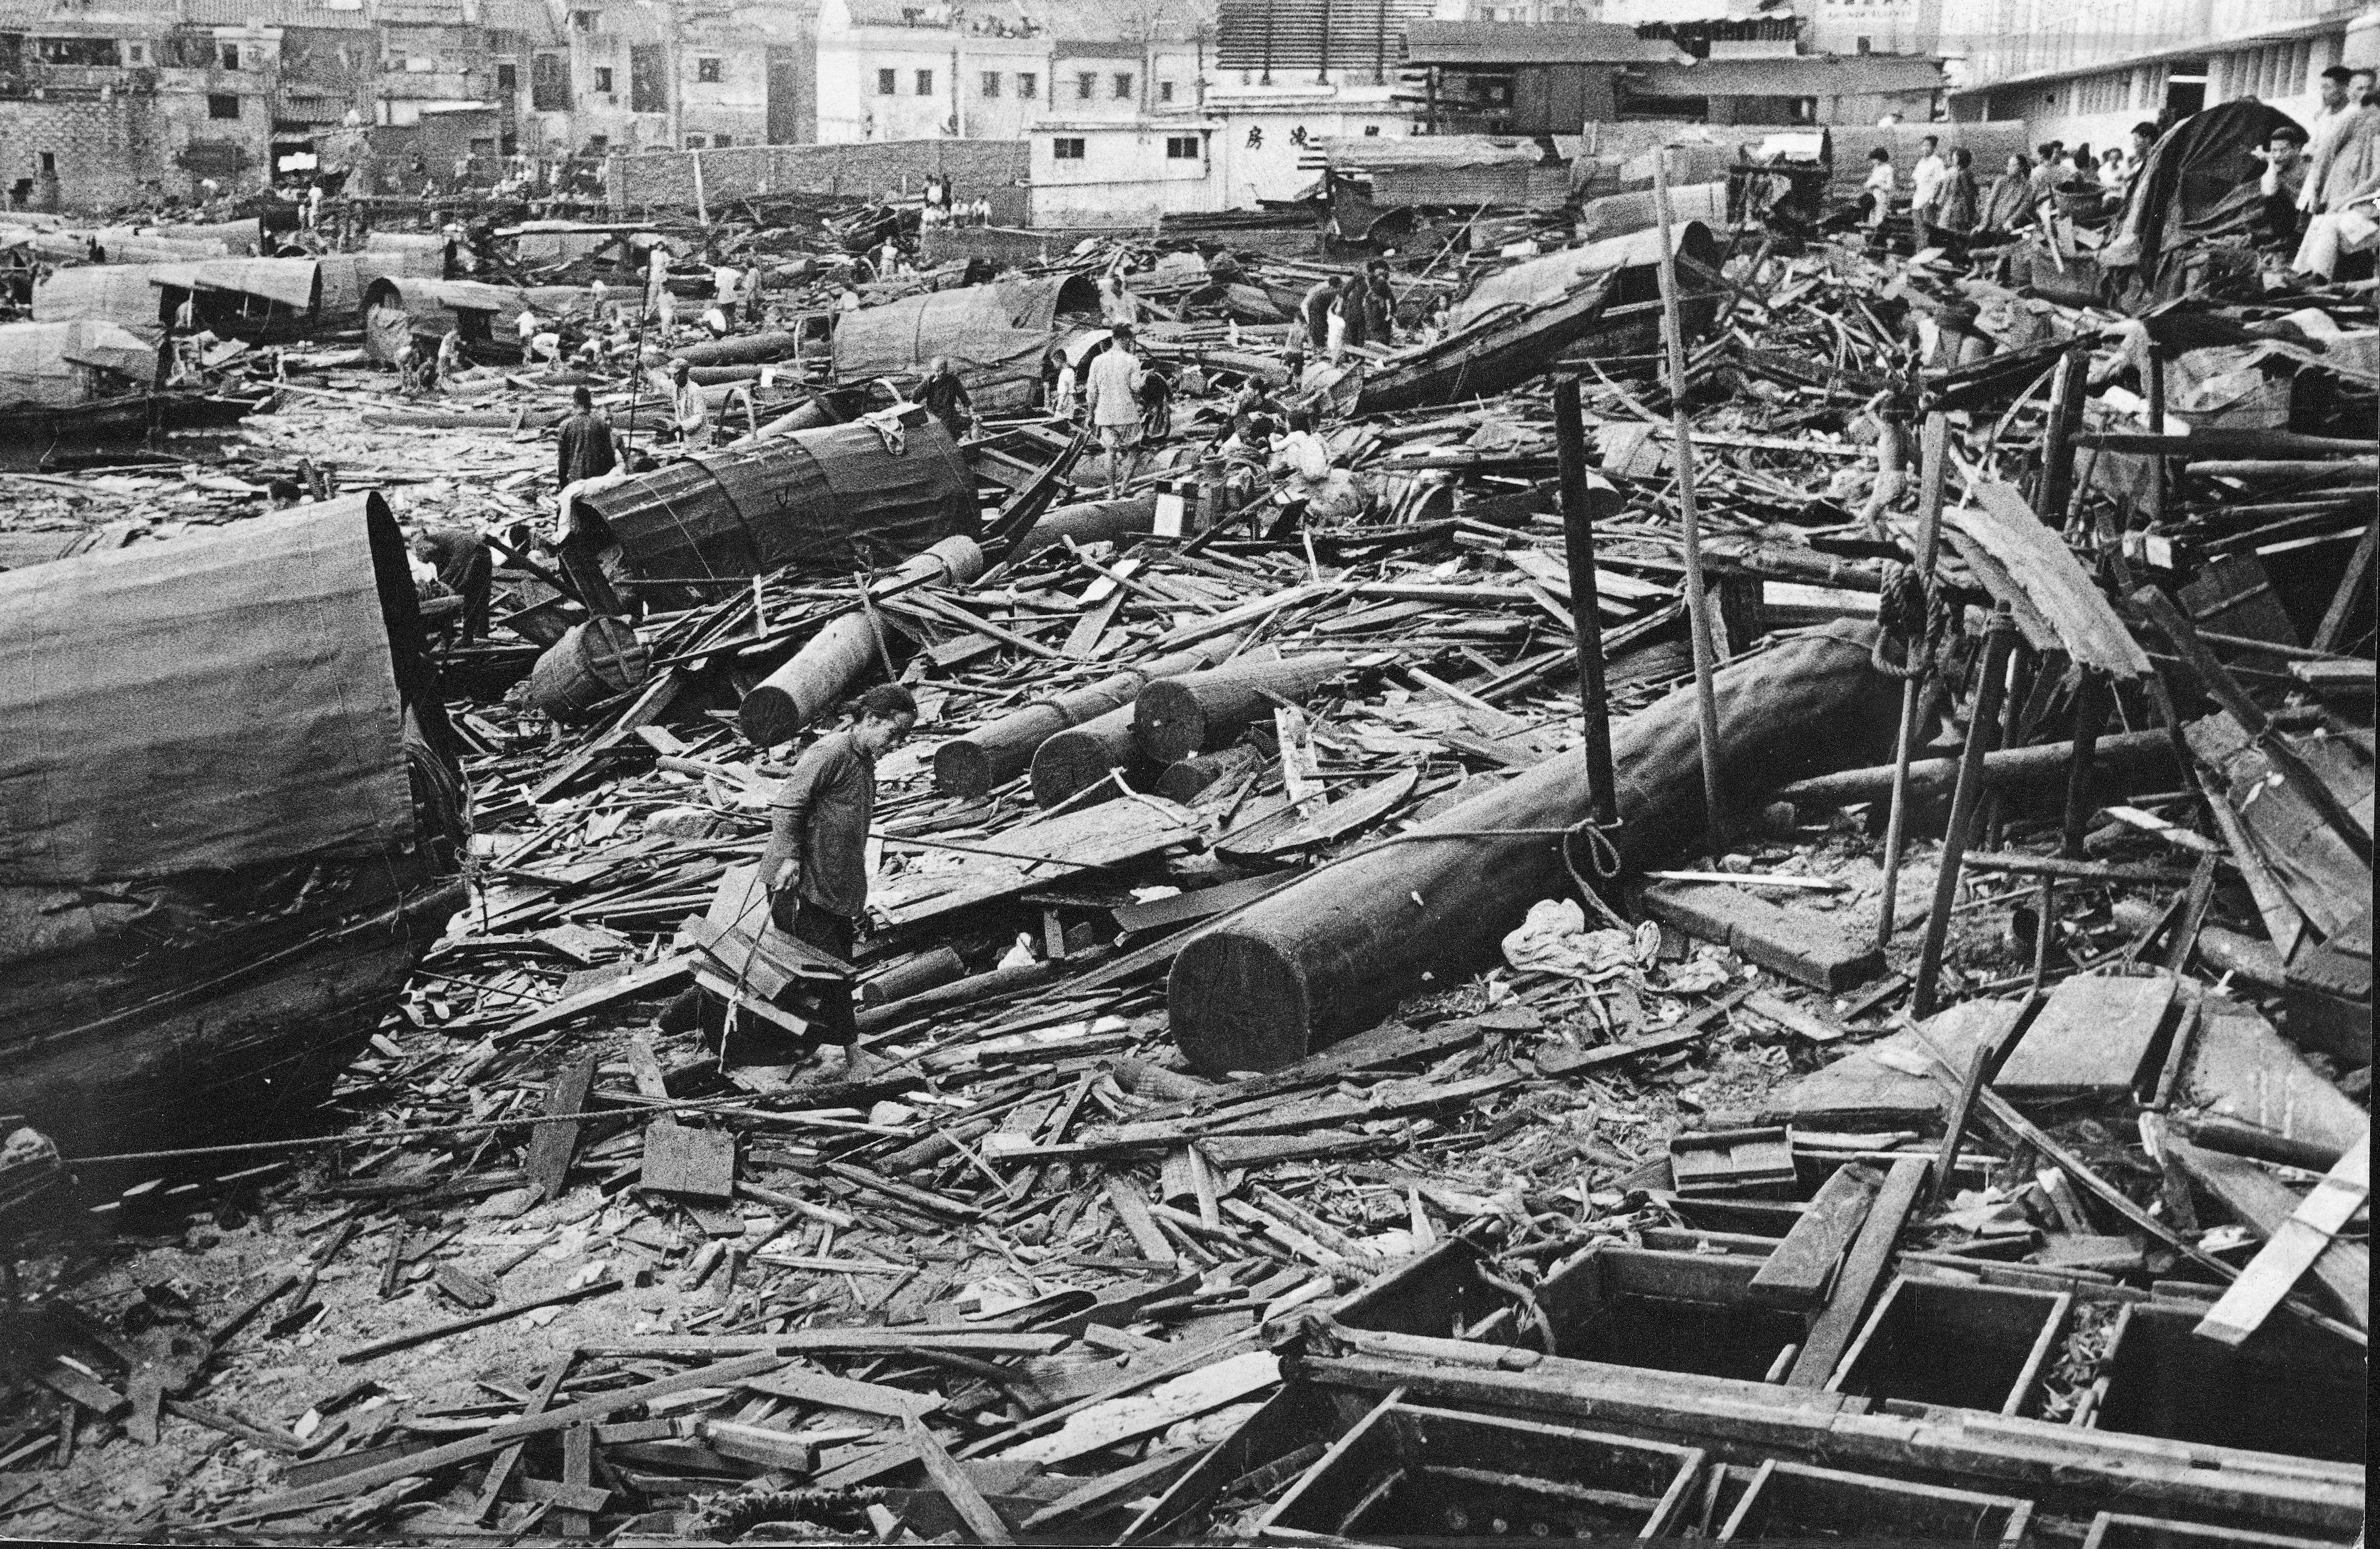 Super Typhoon Wanda struck Hong Kong in 1962 and is considered one of the deadliest storms recorded in the city. Photo: SCMP